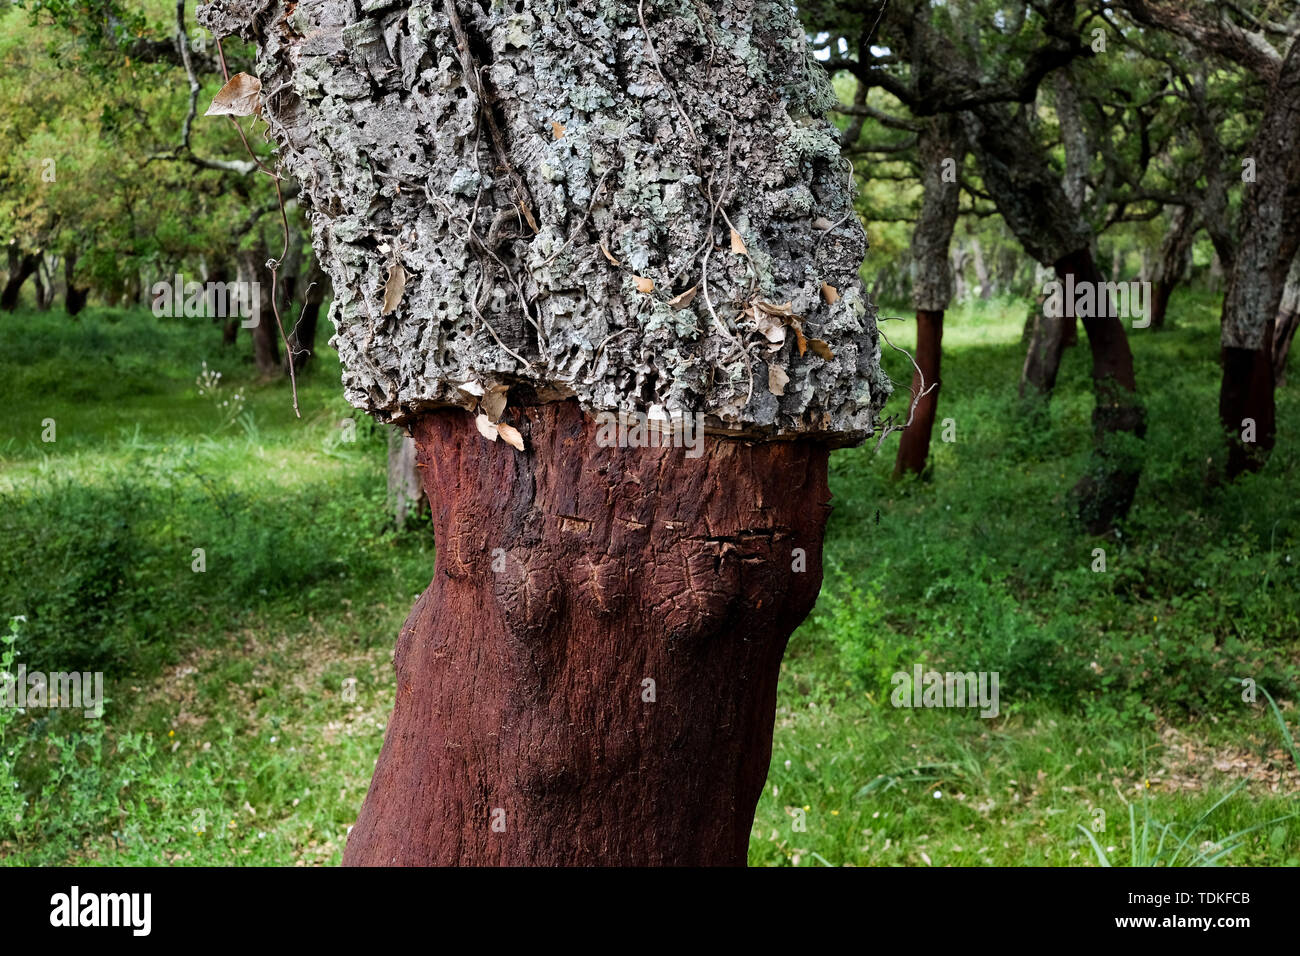 Budduso, Italy. 25th May, 2019. A cork oak, whose cork was separated from the lower part of the trunk and harvested, grows in a forest. Characteristic of the cork oak are the thick, longitudinally cracked cork layers of the grey-brown trunk bark. A cork layer is formed which can become three to five centimetres thick. The light and spongy cork fabric shows vertical cracks and is white on the outside, red to reddish brown on the inside. After harvesting the cork, the trunk appears reddish brown. Credit: Jens Kalaene/dpa-Zentralbild/ZB/dpa/Alamy Live News Stock Photo